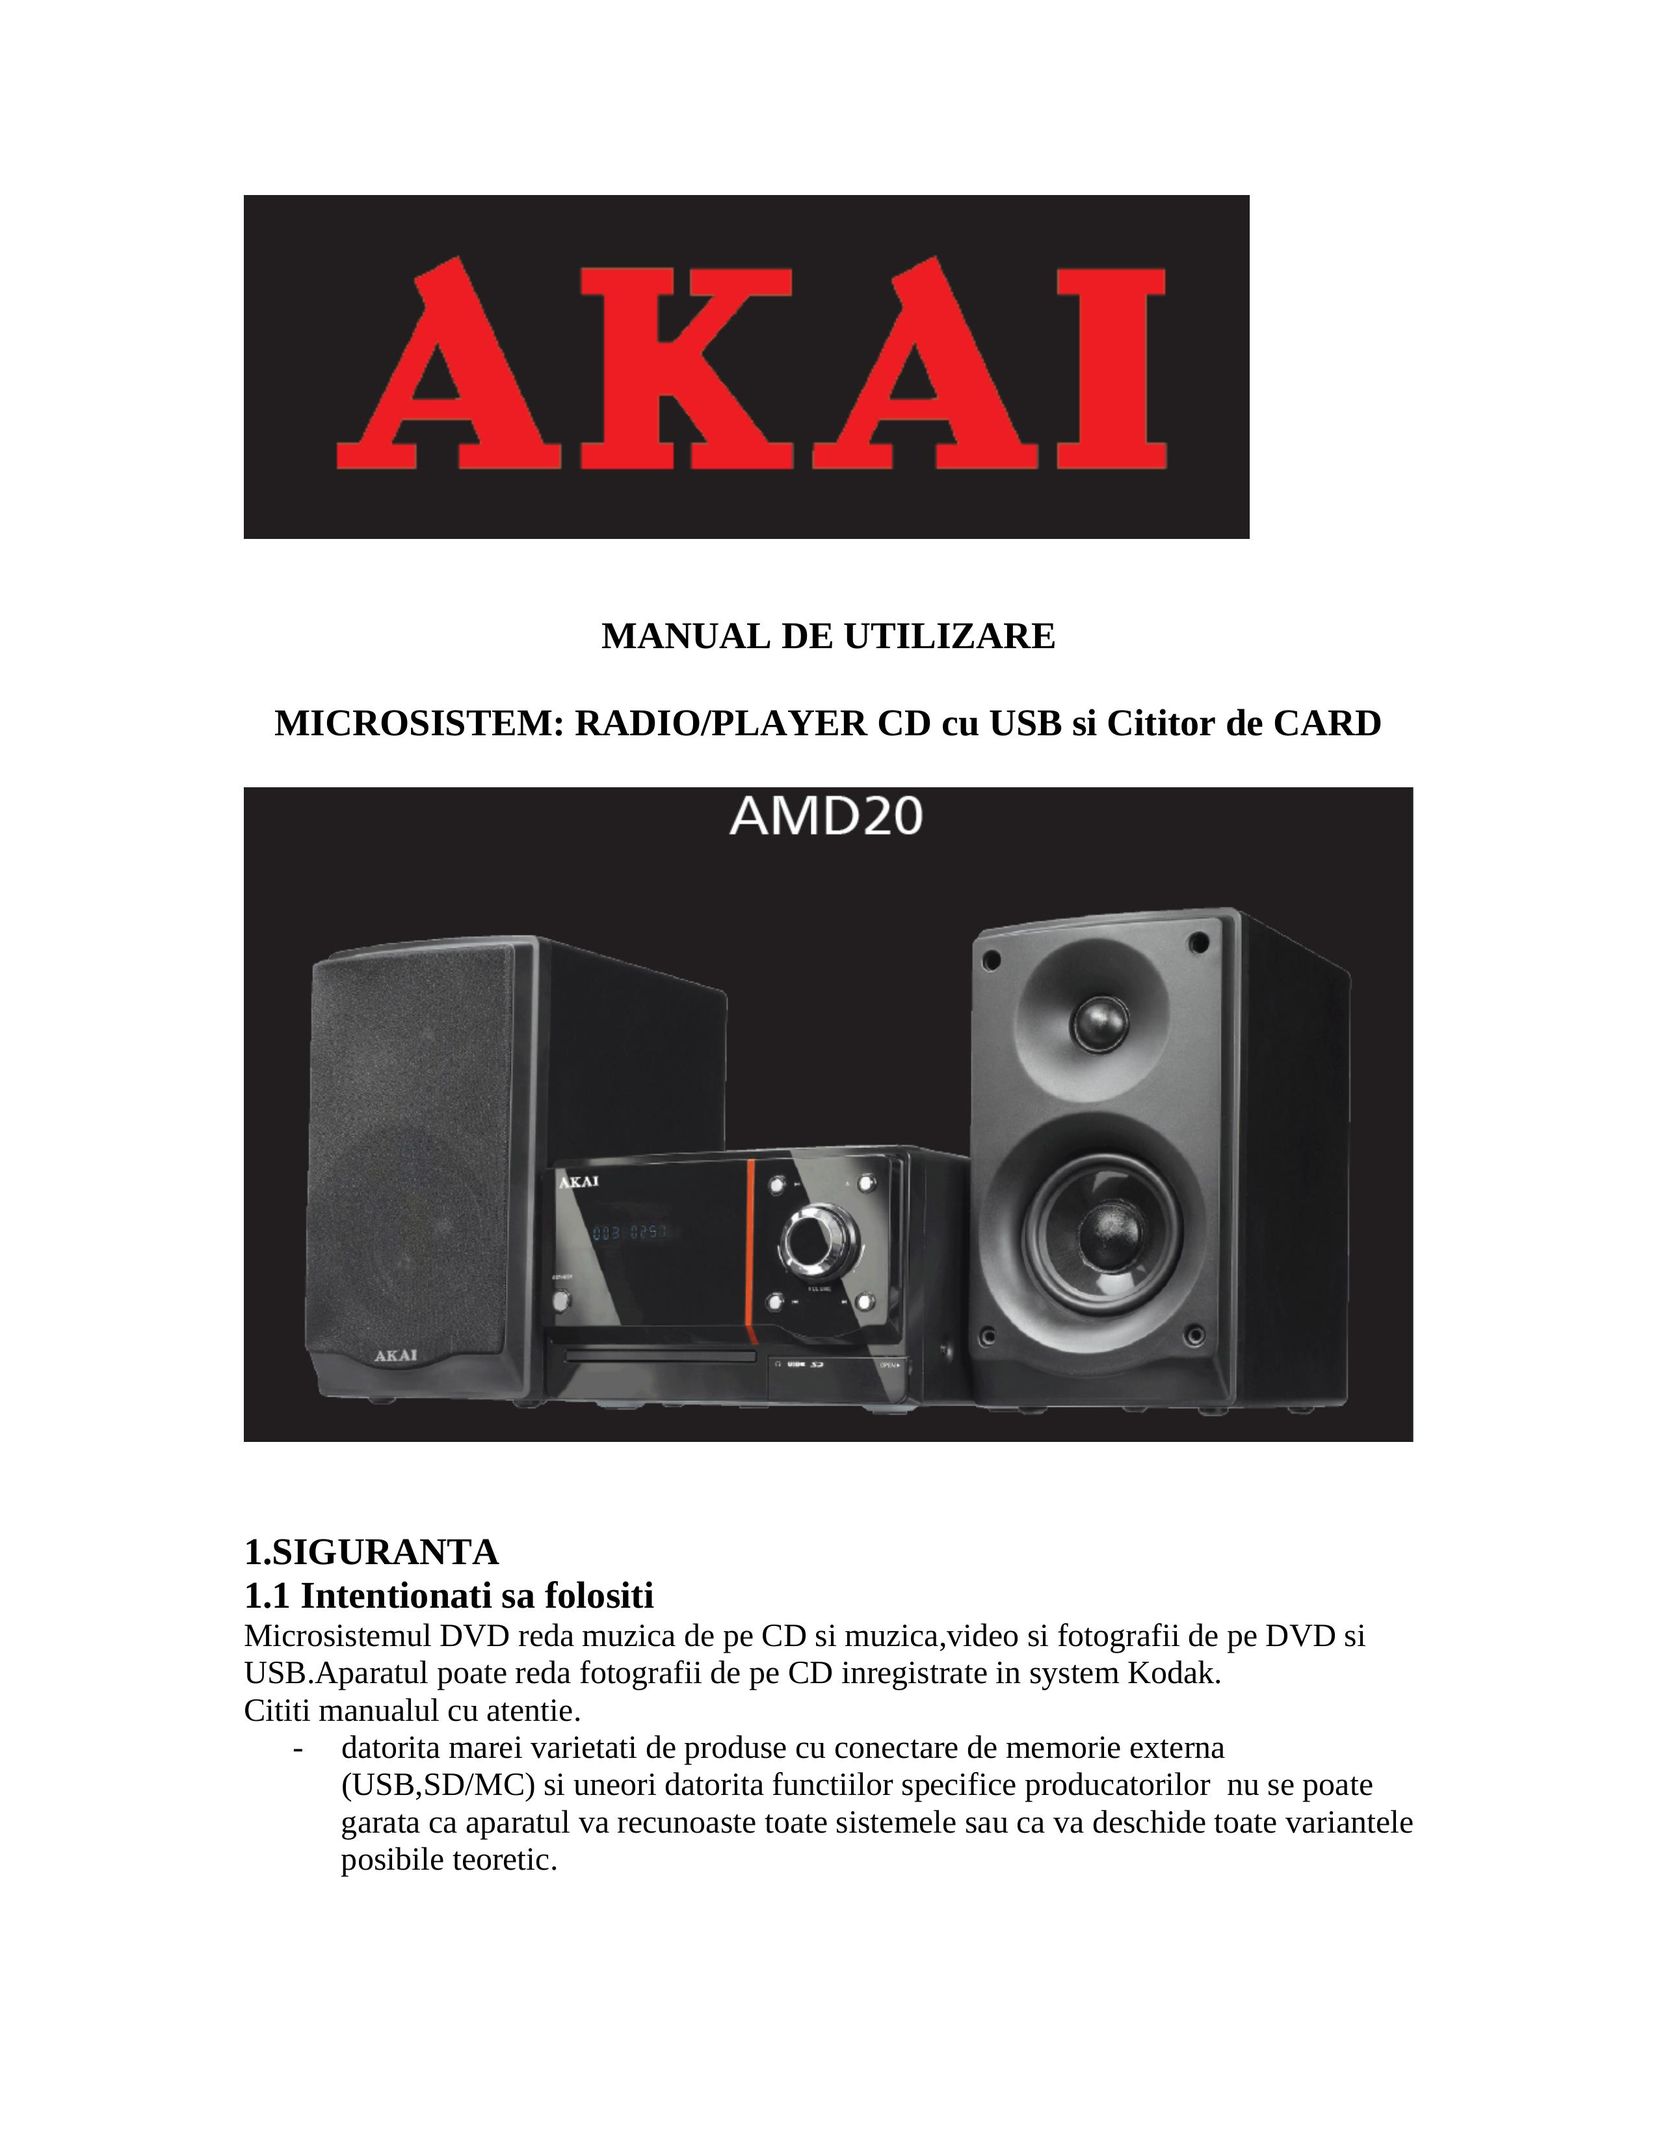 Akai AMD20 Stereo System User Manual (Page 1)